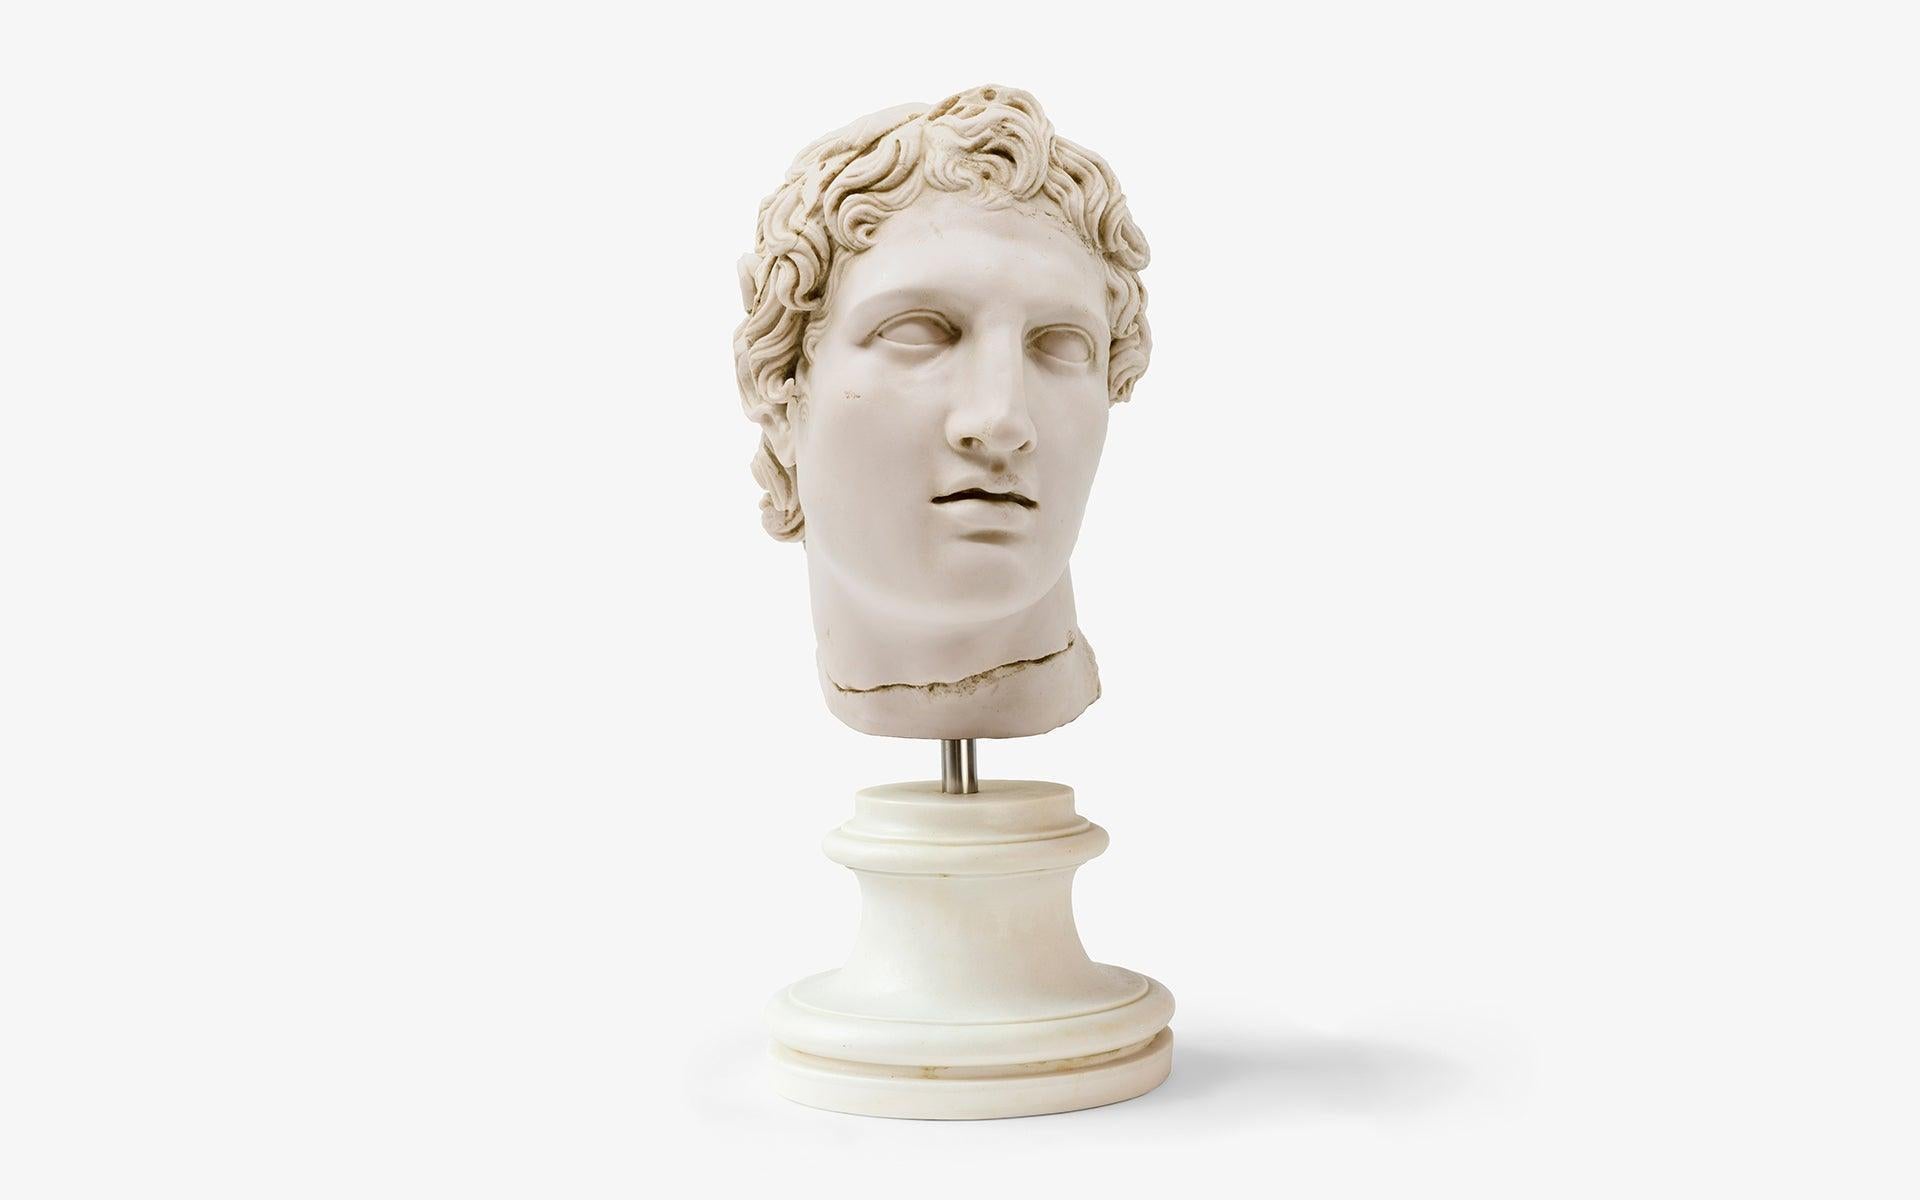 Height: 65 cm / Weight: 20 kg

Alexander, the real name of Macedonian III. Alexandros, commonly known as Alexander the Great, was king of the ancient Greek kingdom of Macedonia and a member of the Argead dynasty. He was born in Pella in 356 BC, and